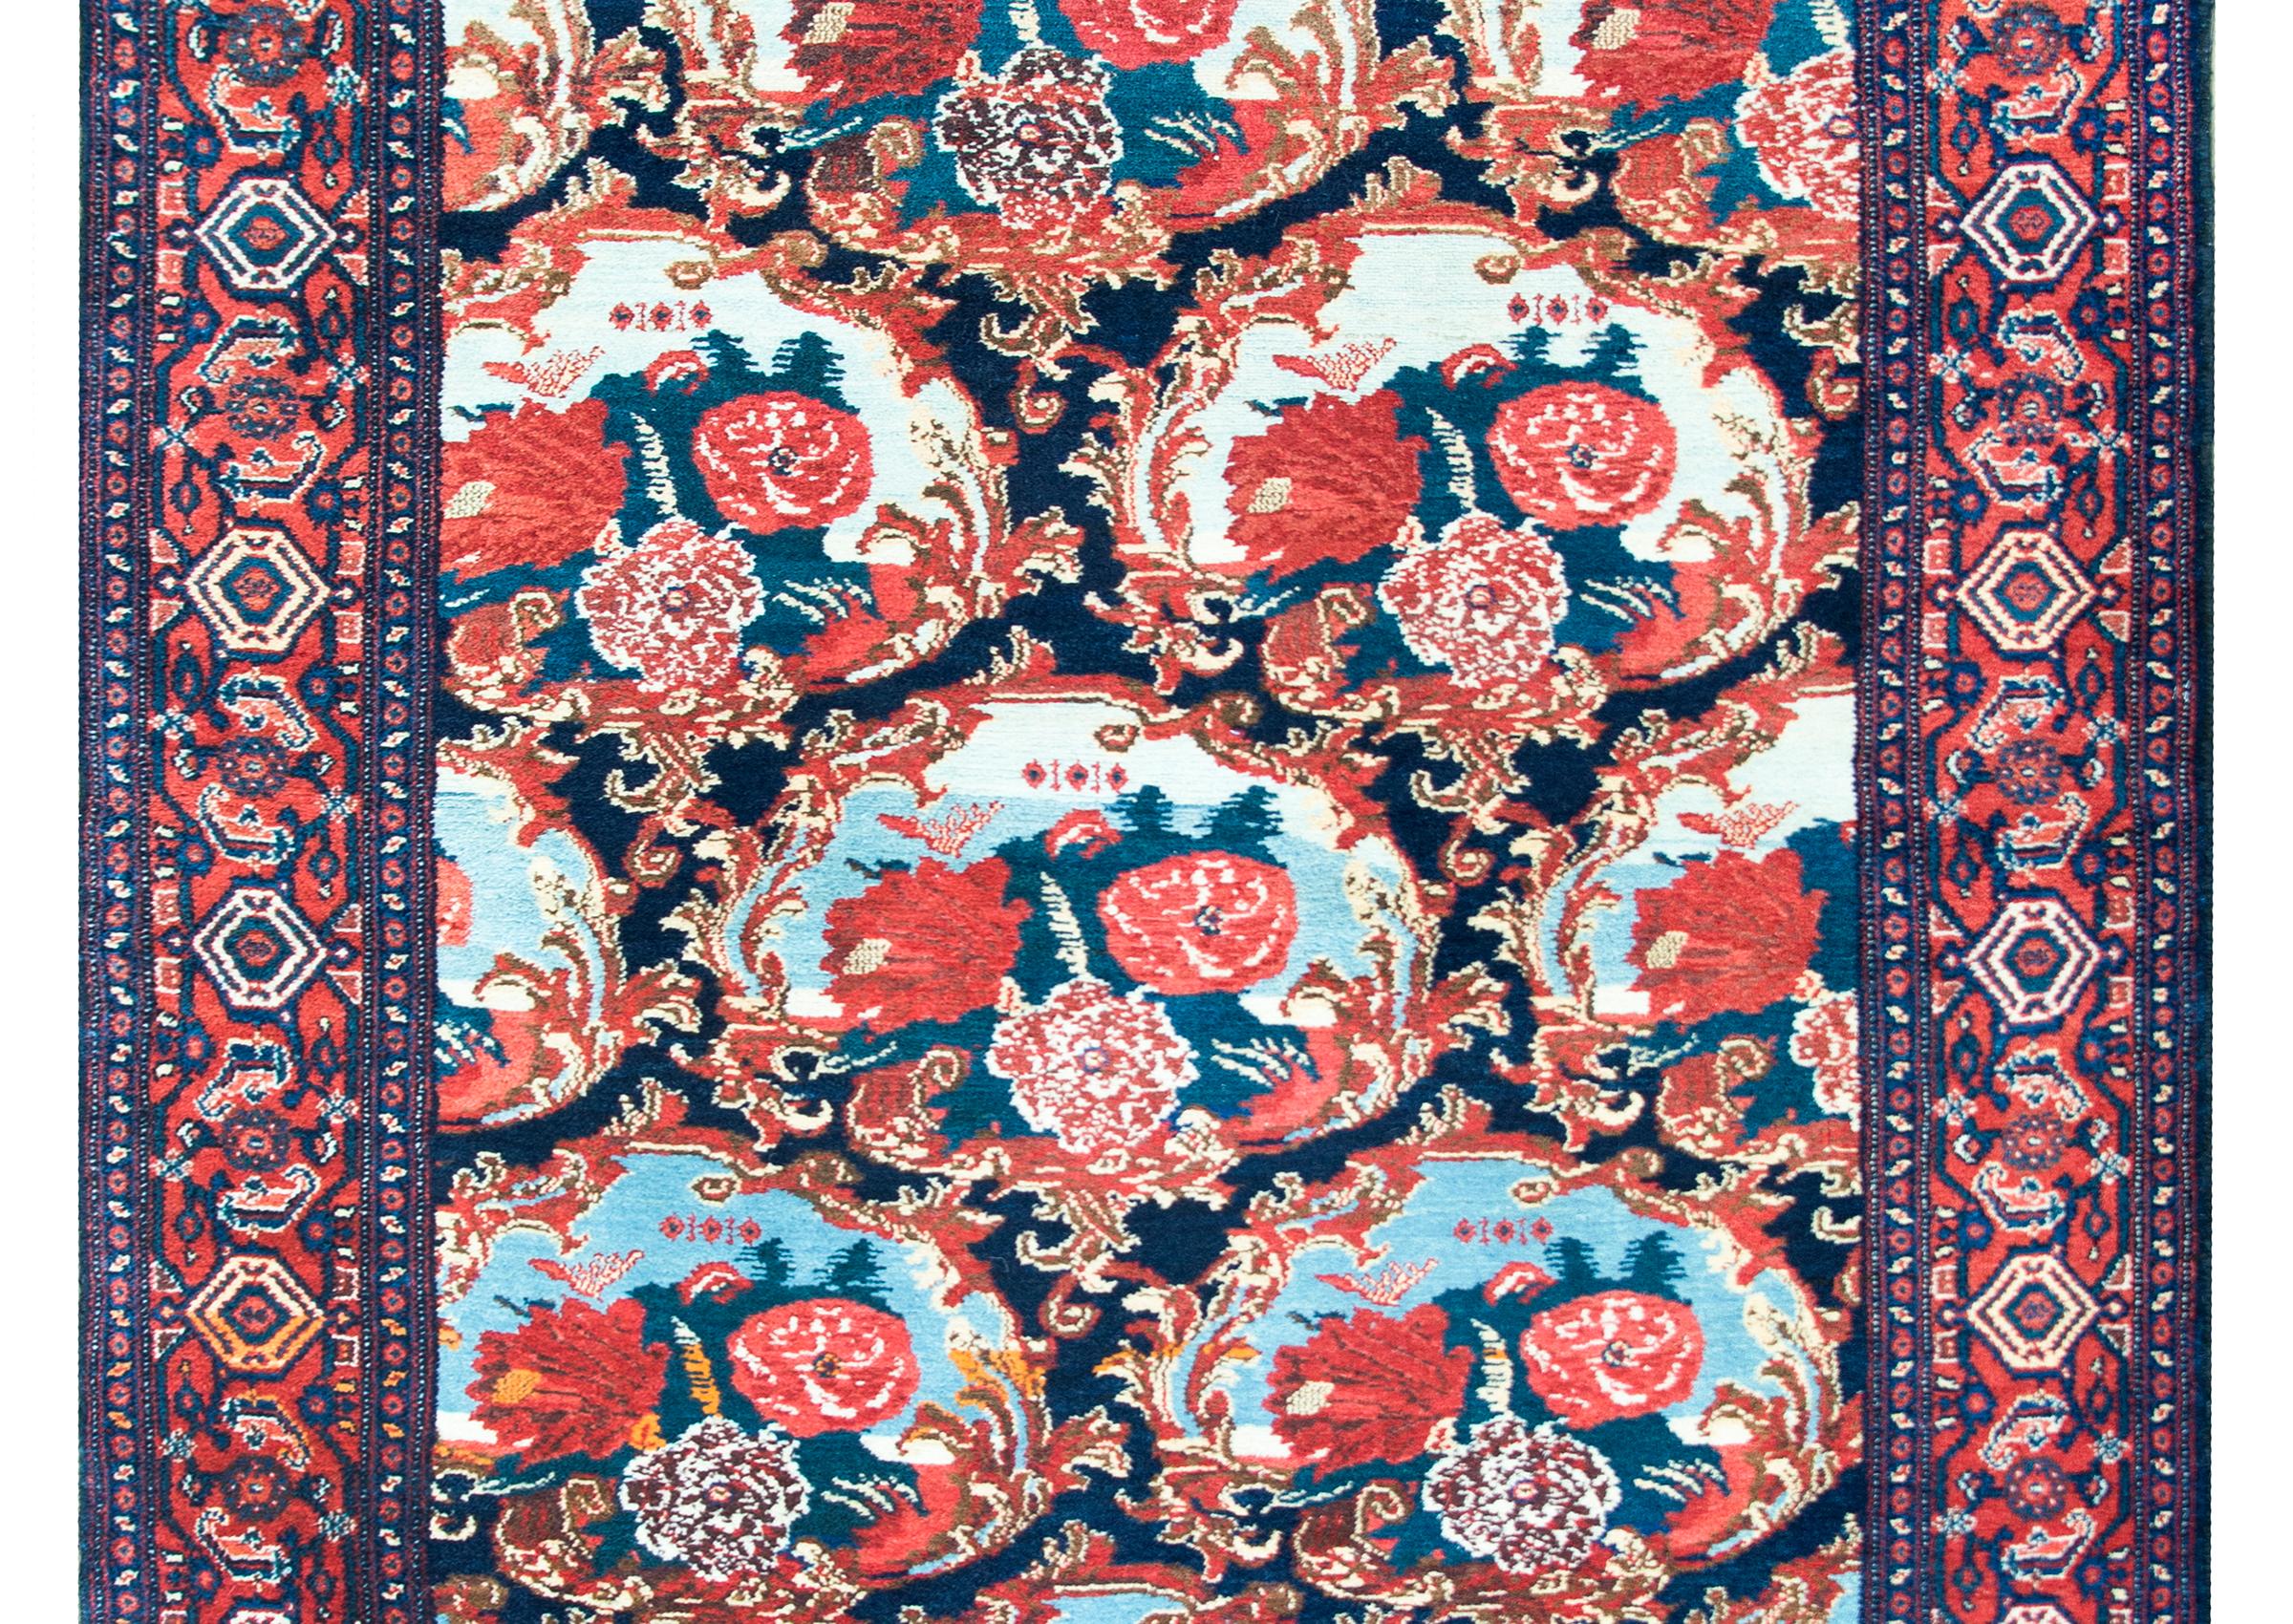 An incredible early 20th century Persian Senneh rug with the most beautiful large scale floral medallions each surrounded by baroque floral frames, and woven in brilliant crimson, pink, white, light and dark indigo, and all surrounded by a repeated